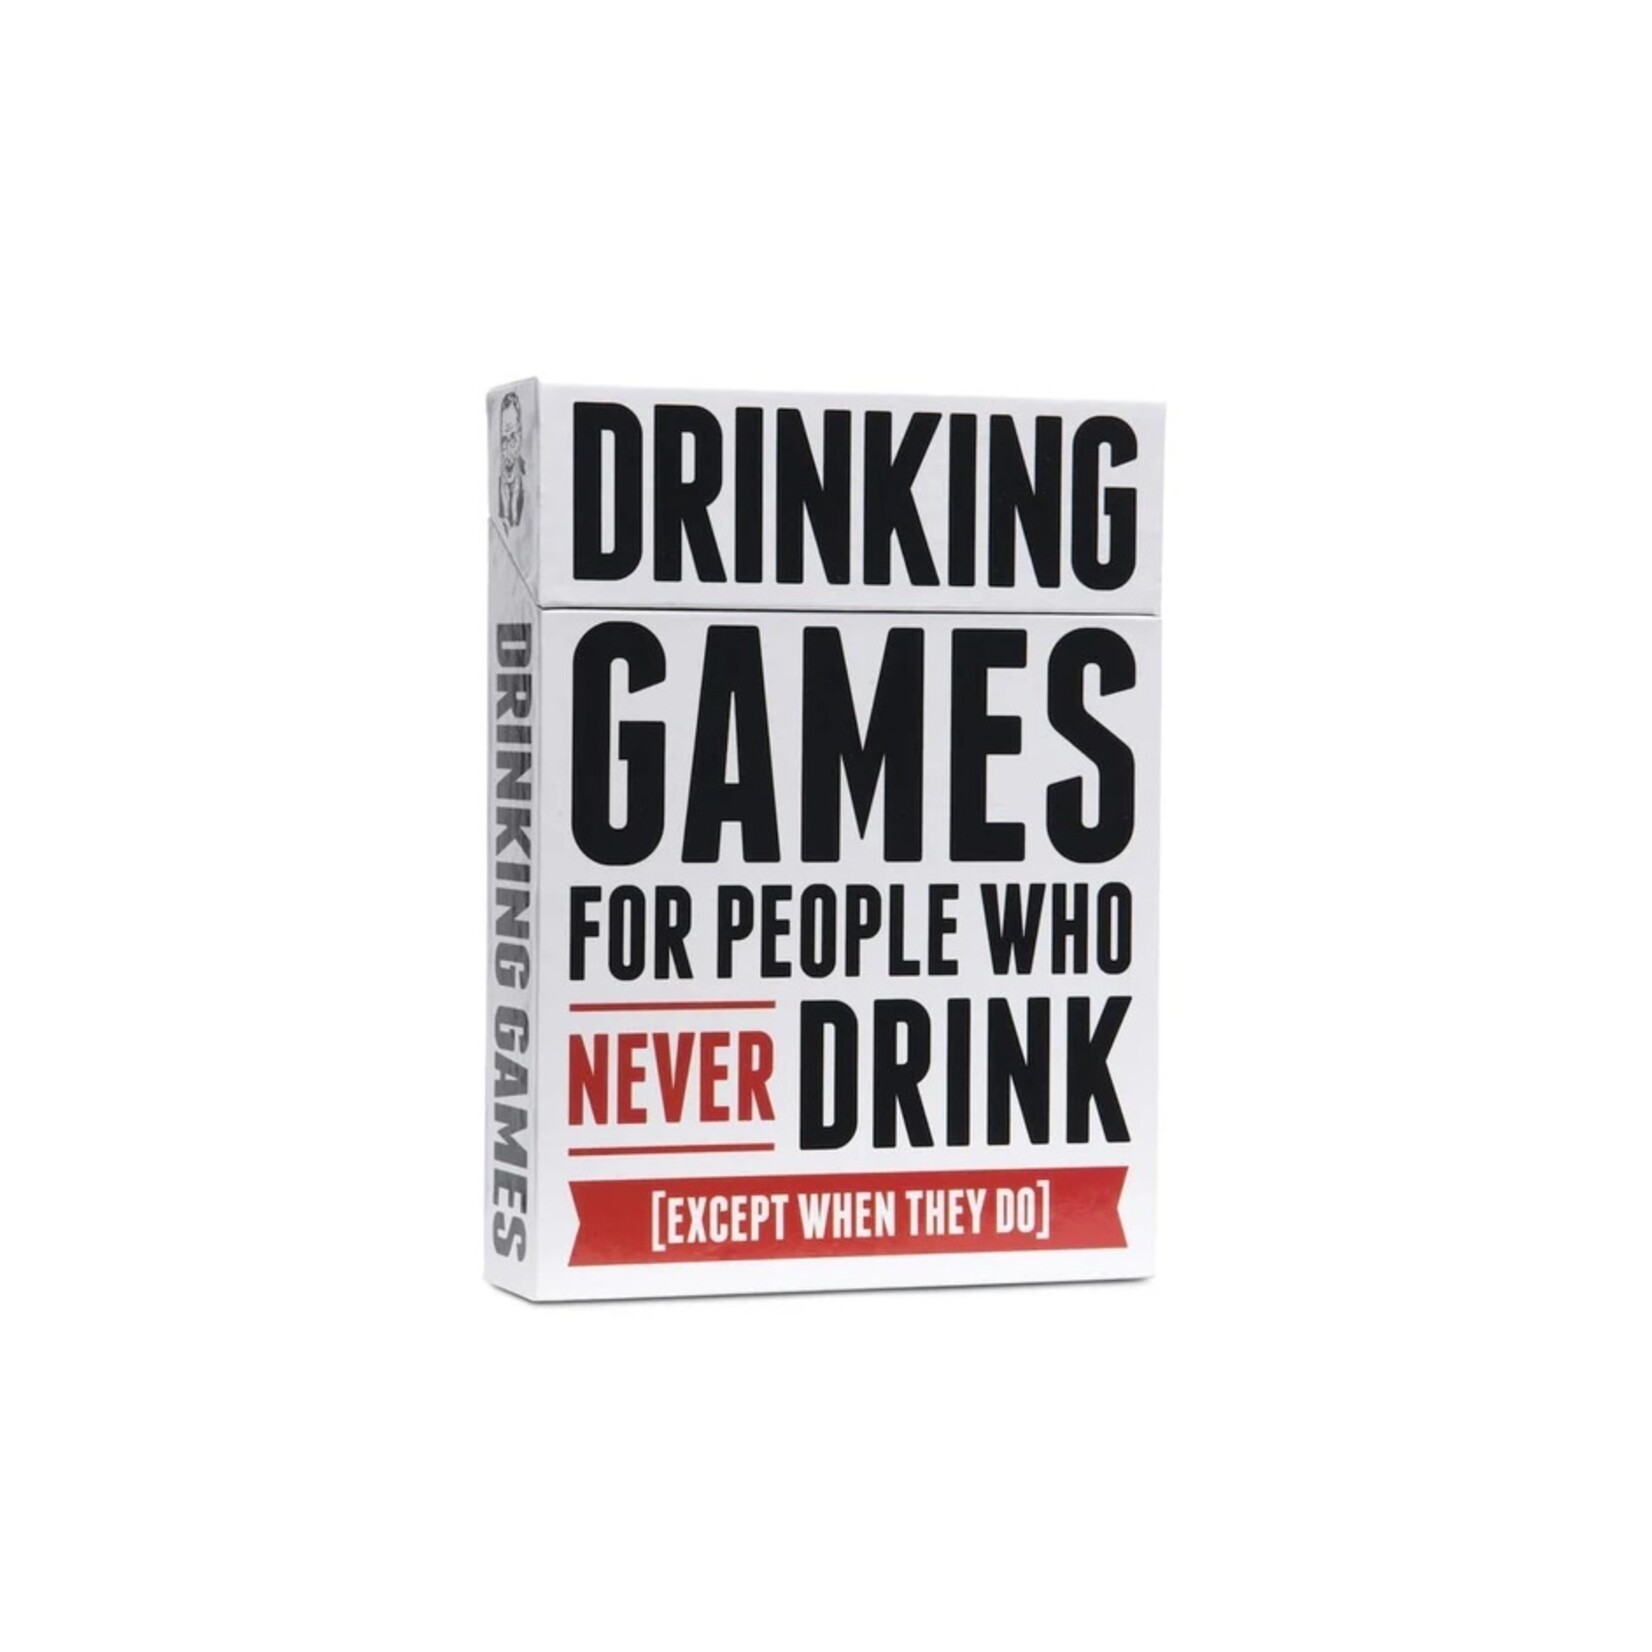 Drinking Games for People Who Never drink (English)